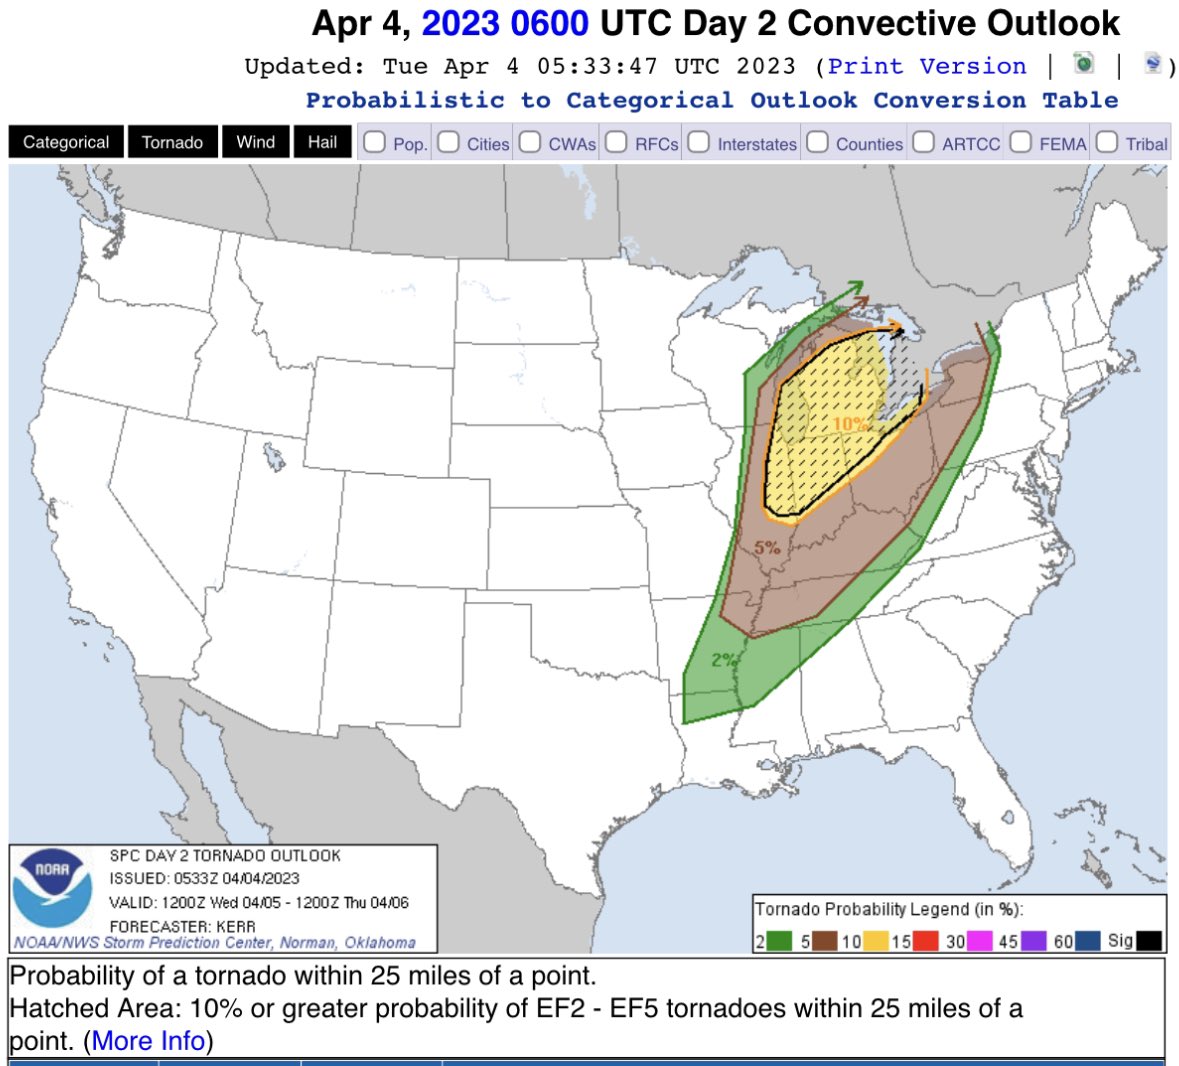 OHIO VALLEY/GREAT LAKES: Be Weather Aware Wednesday 4/5/23 for severe storms and tornado potential